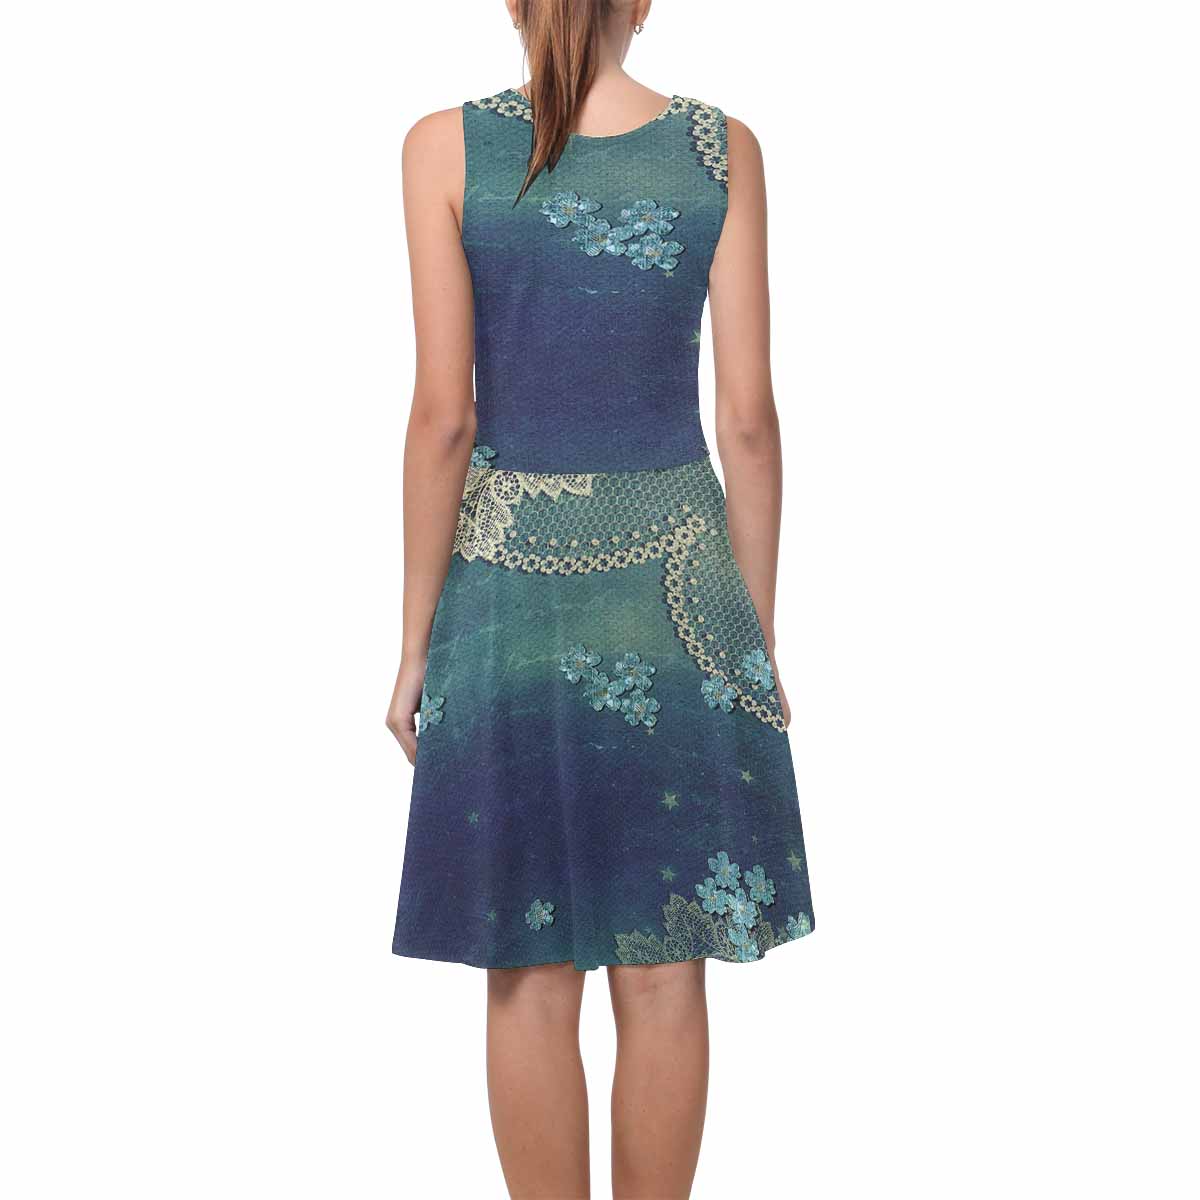 Victorian printed lace summer dress, Design 04